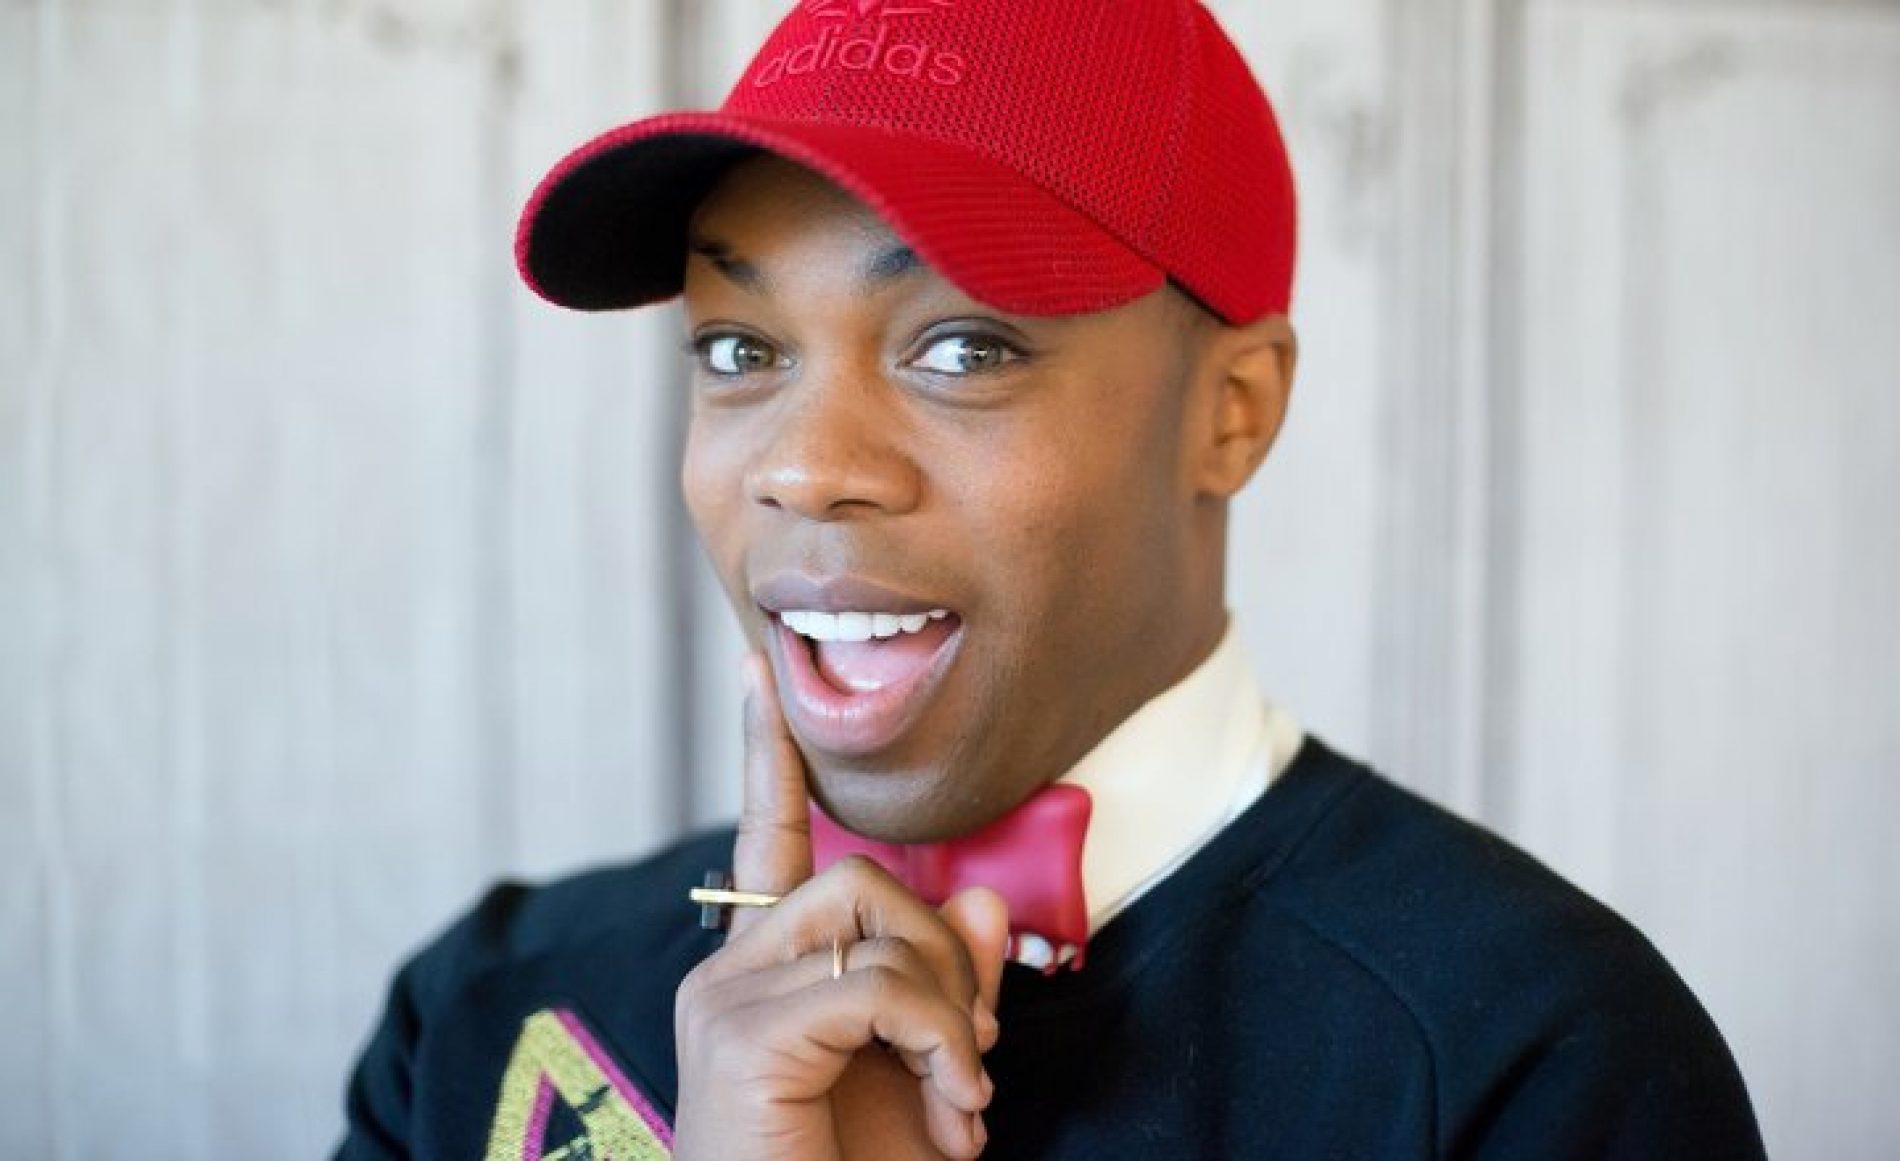 Todrick Hall Tells A Brilliantly Uncomfortable Story With ‘Forbidden’